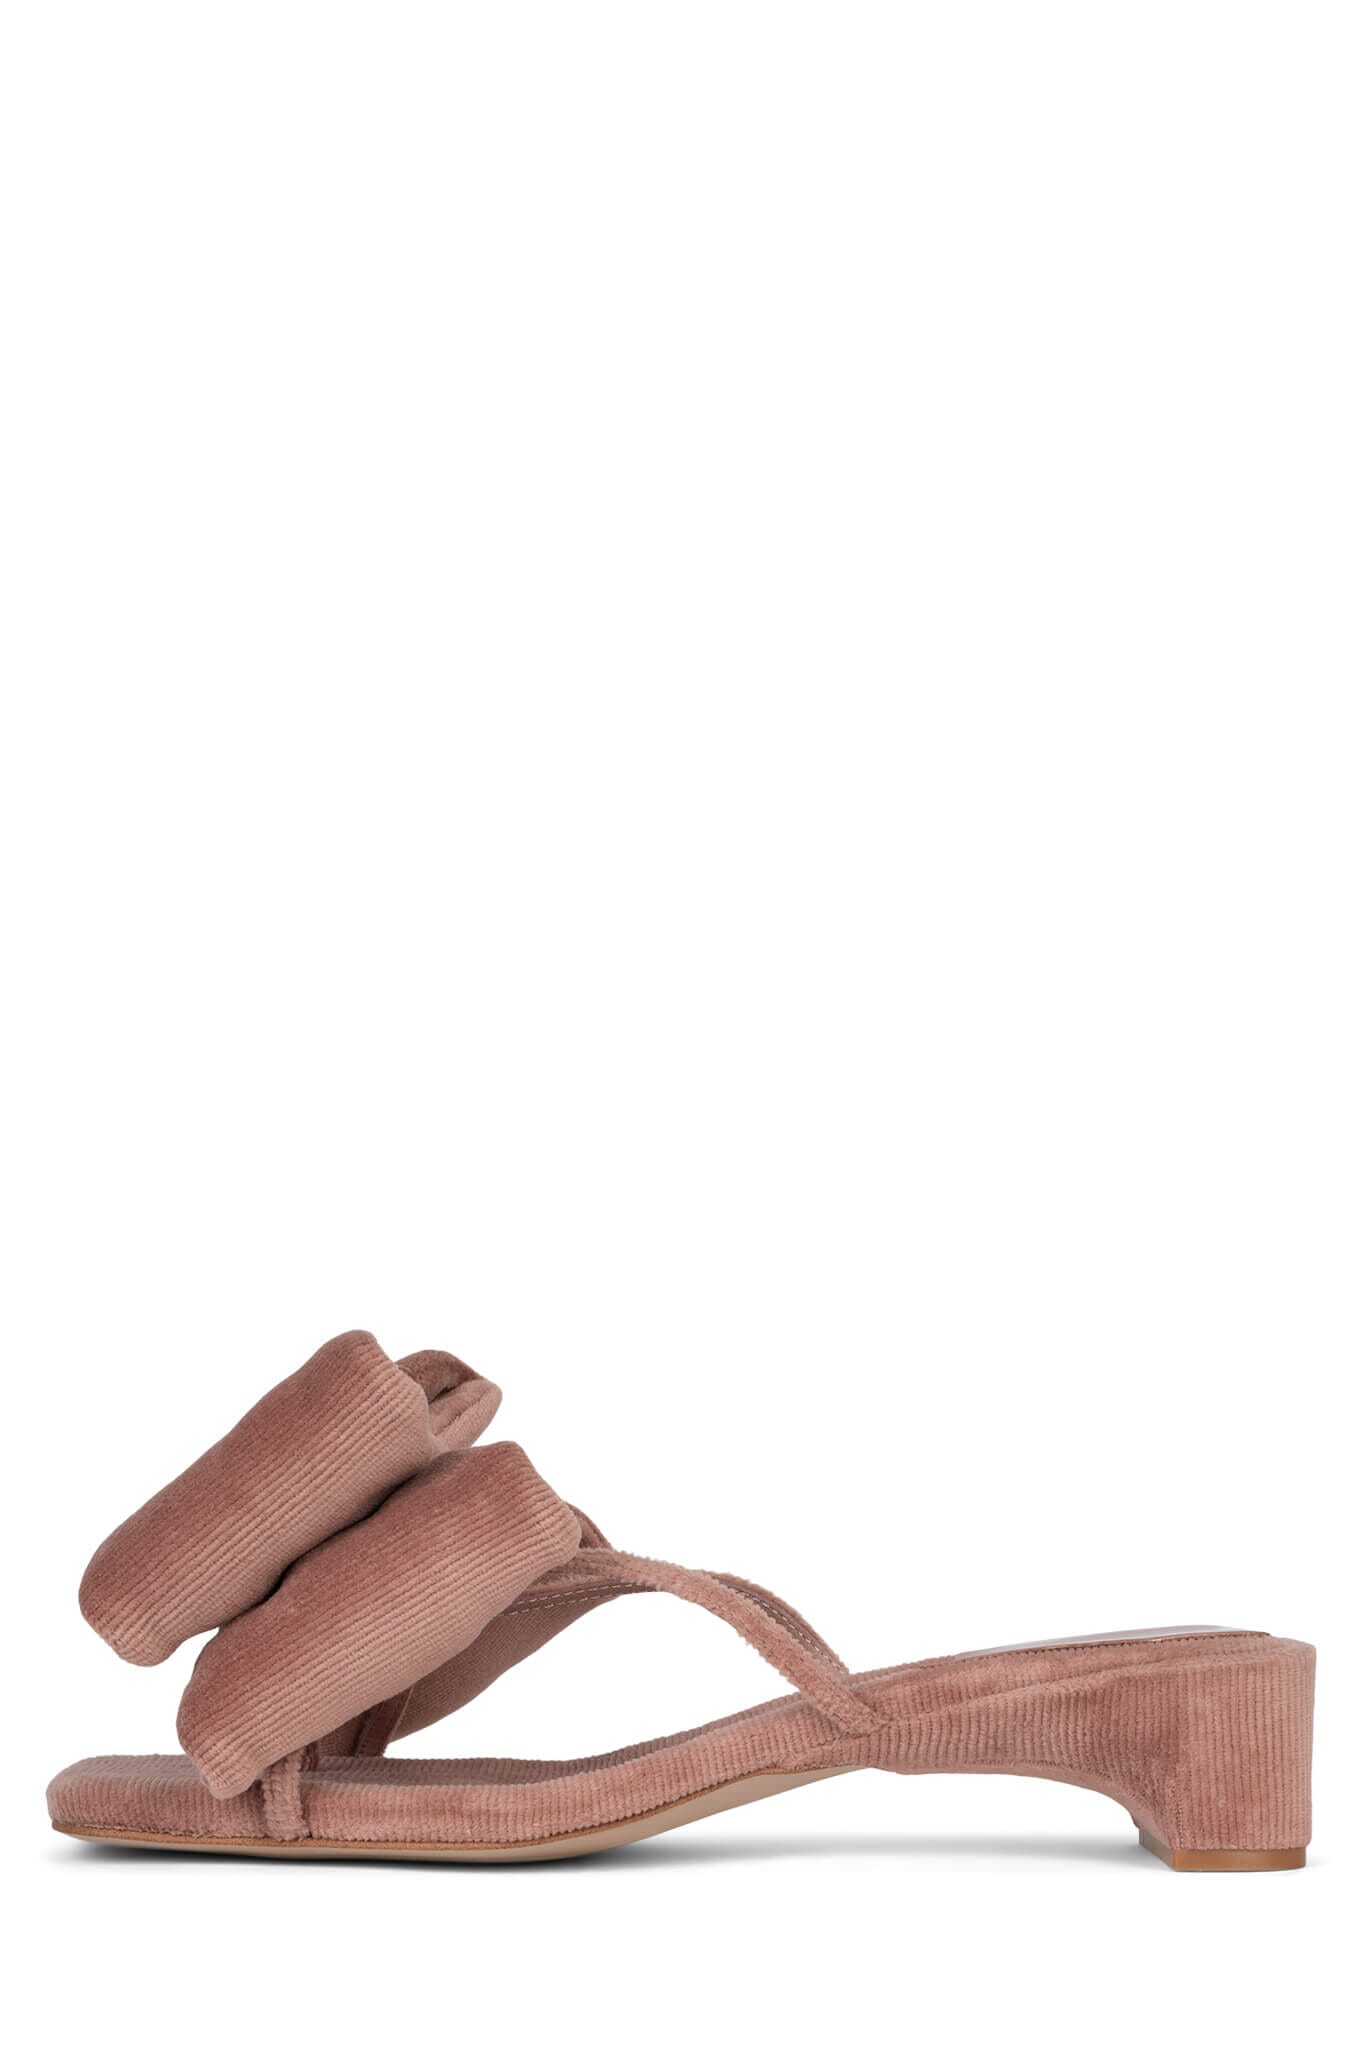 Buy Shoetopia Stylish Ankle Strap Rose-Gold Block Heeled Sandals for Women  & Girls online